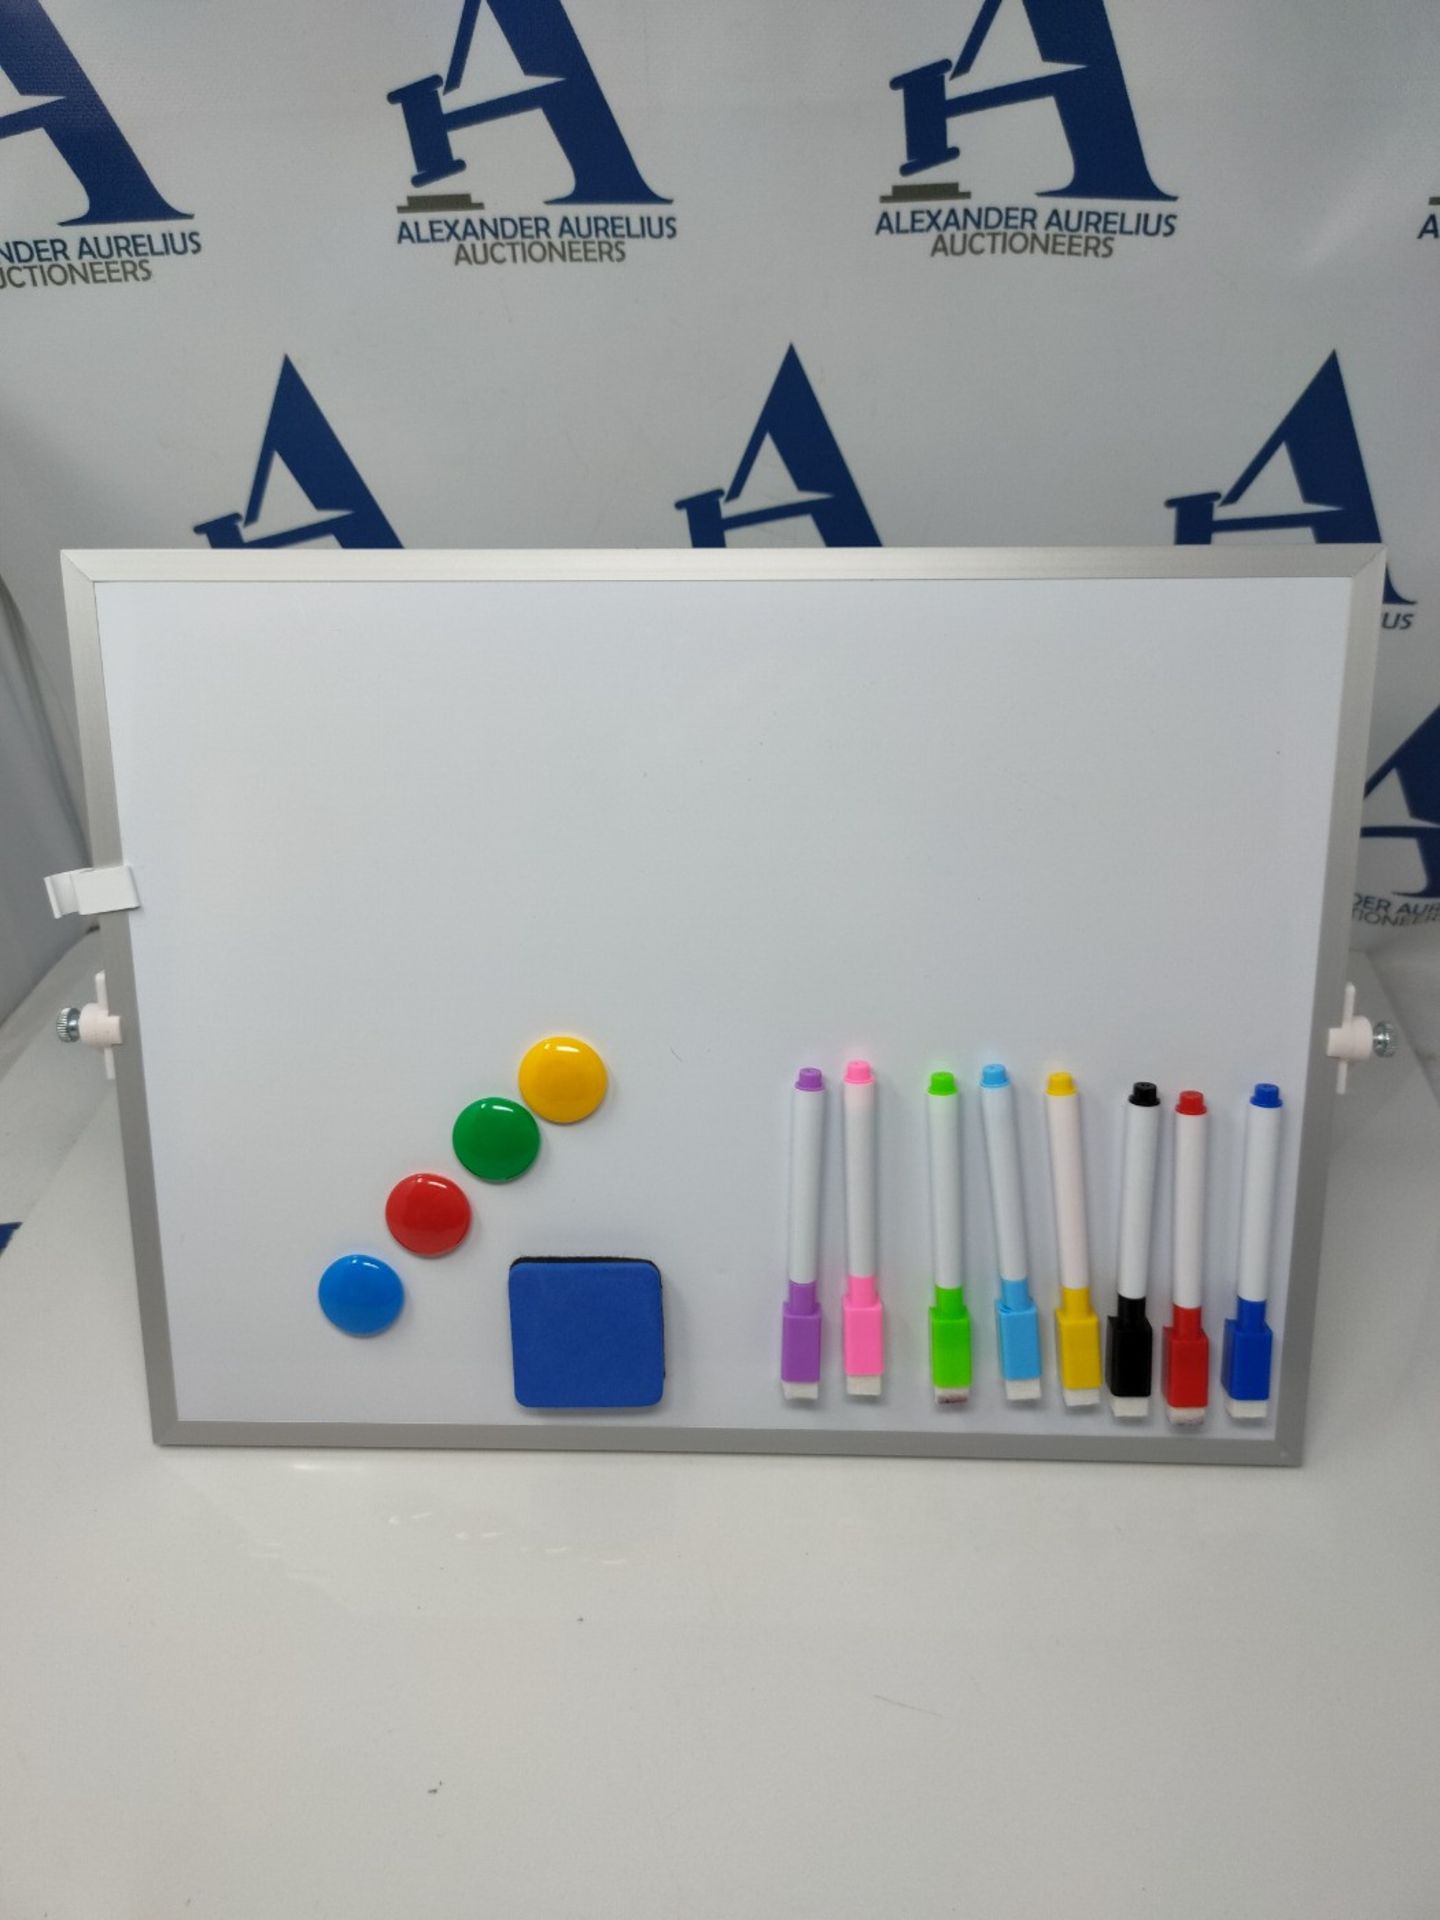 OWill Dry Erase Whiteboard, 30 X 40 cm Mini Magnetic Desktop Whiteboard with Stand, Sm - Image 3 of 3